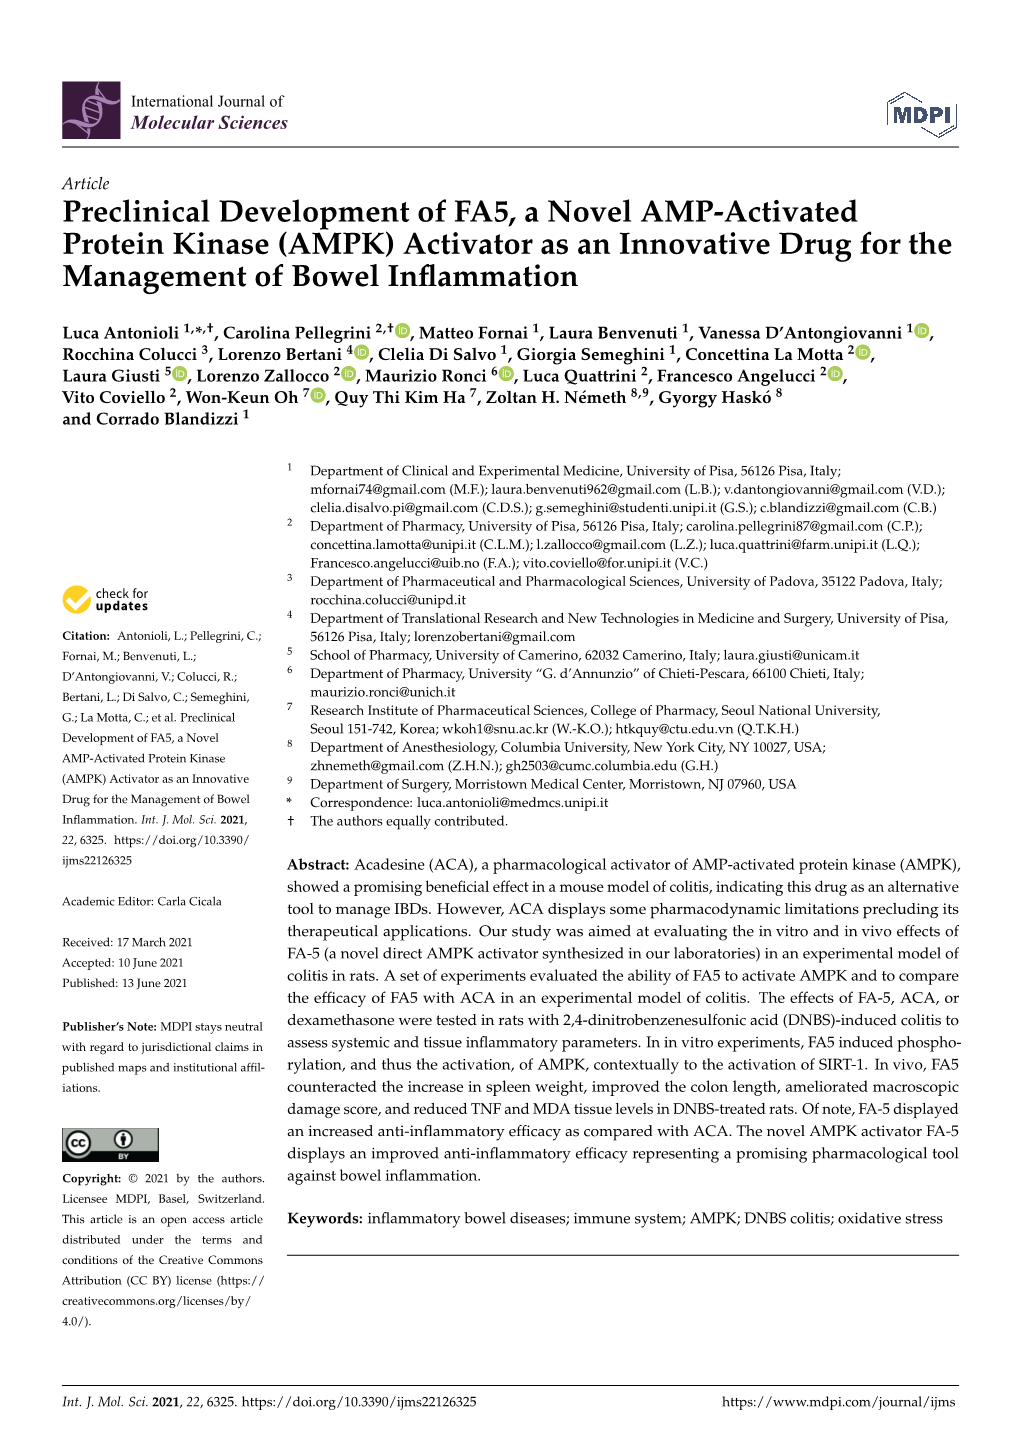 AMPK) Activator As an Innovative Drug for the Management of Bowel Inﬂammation